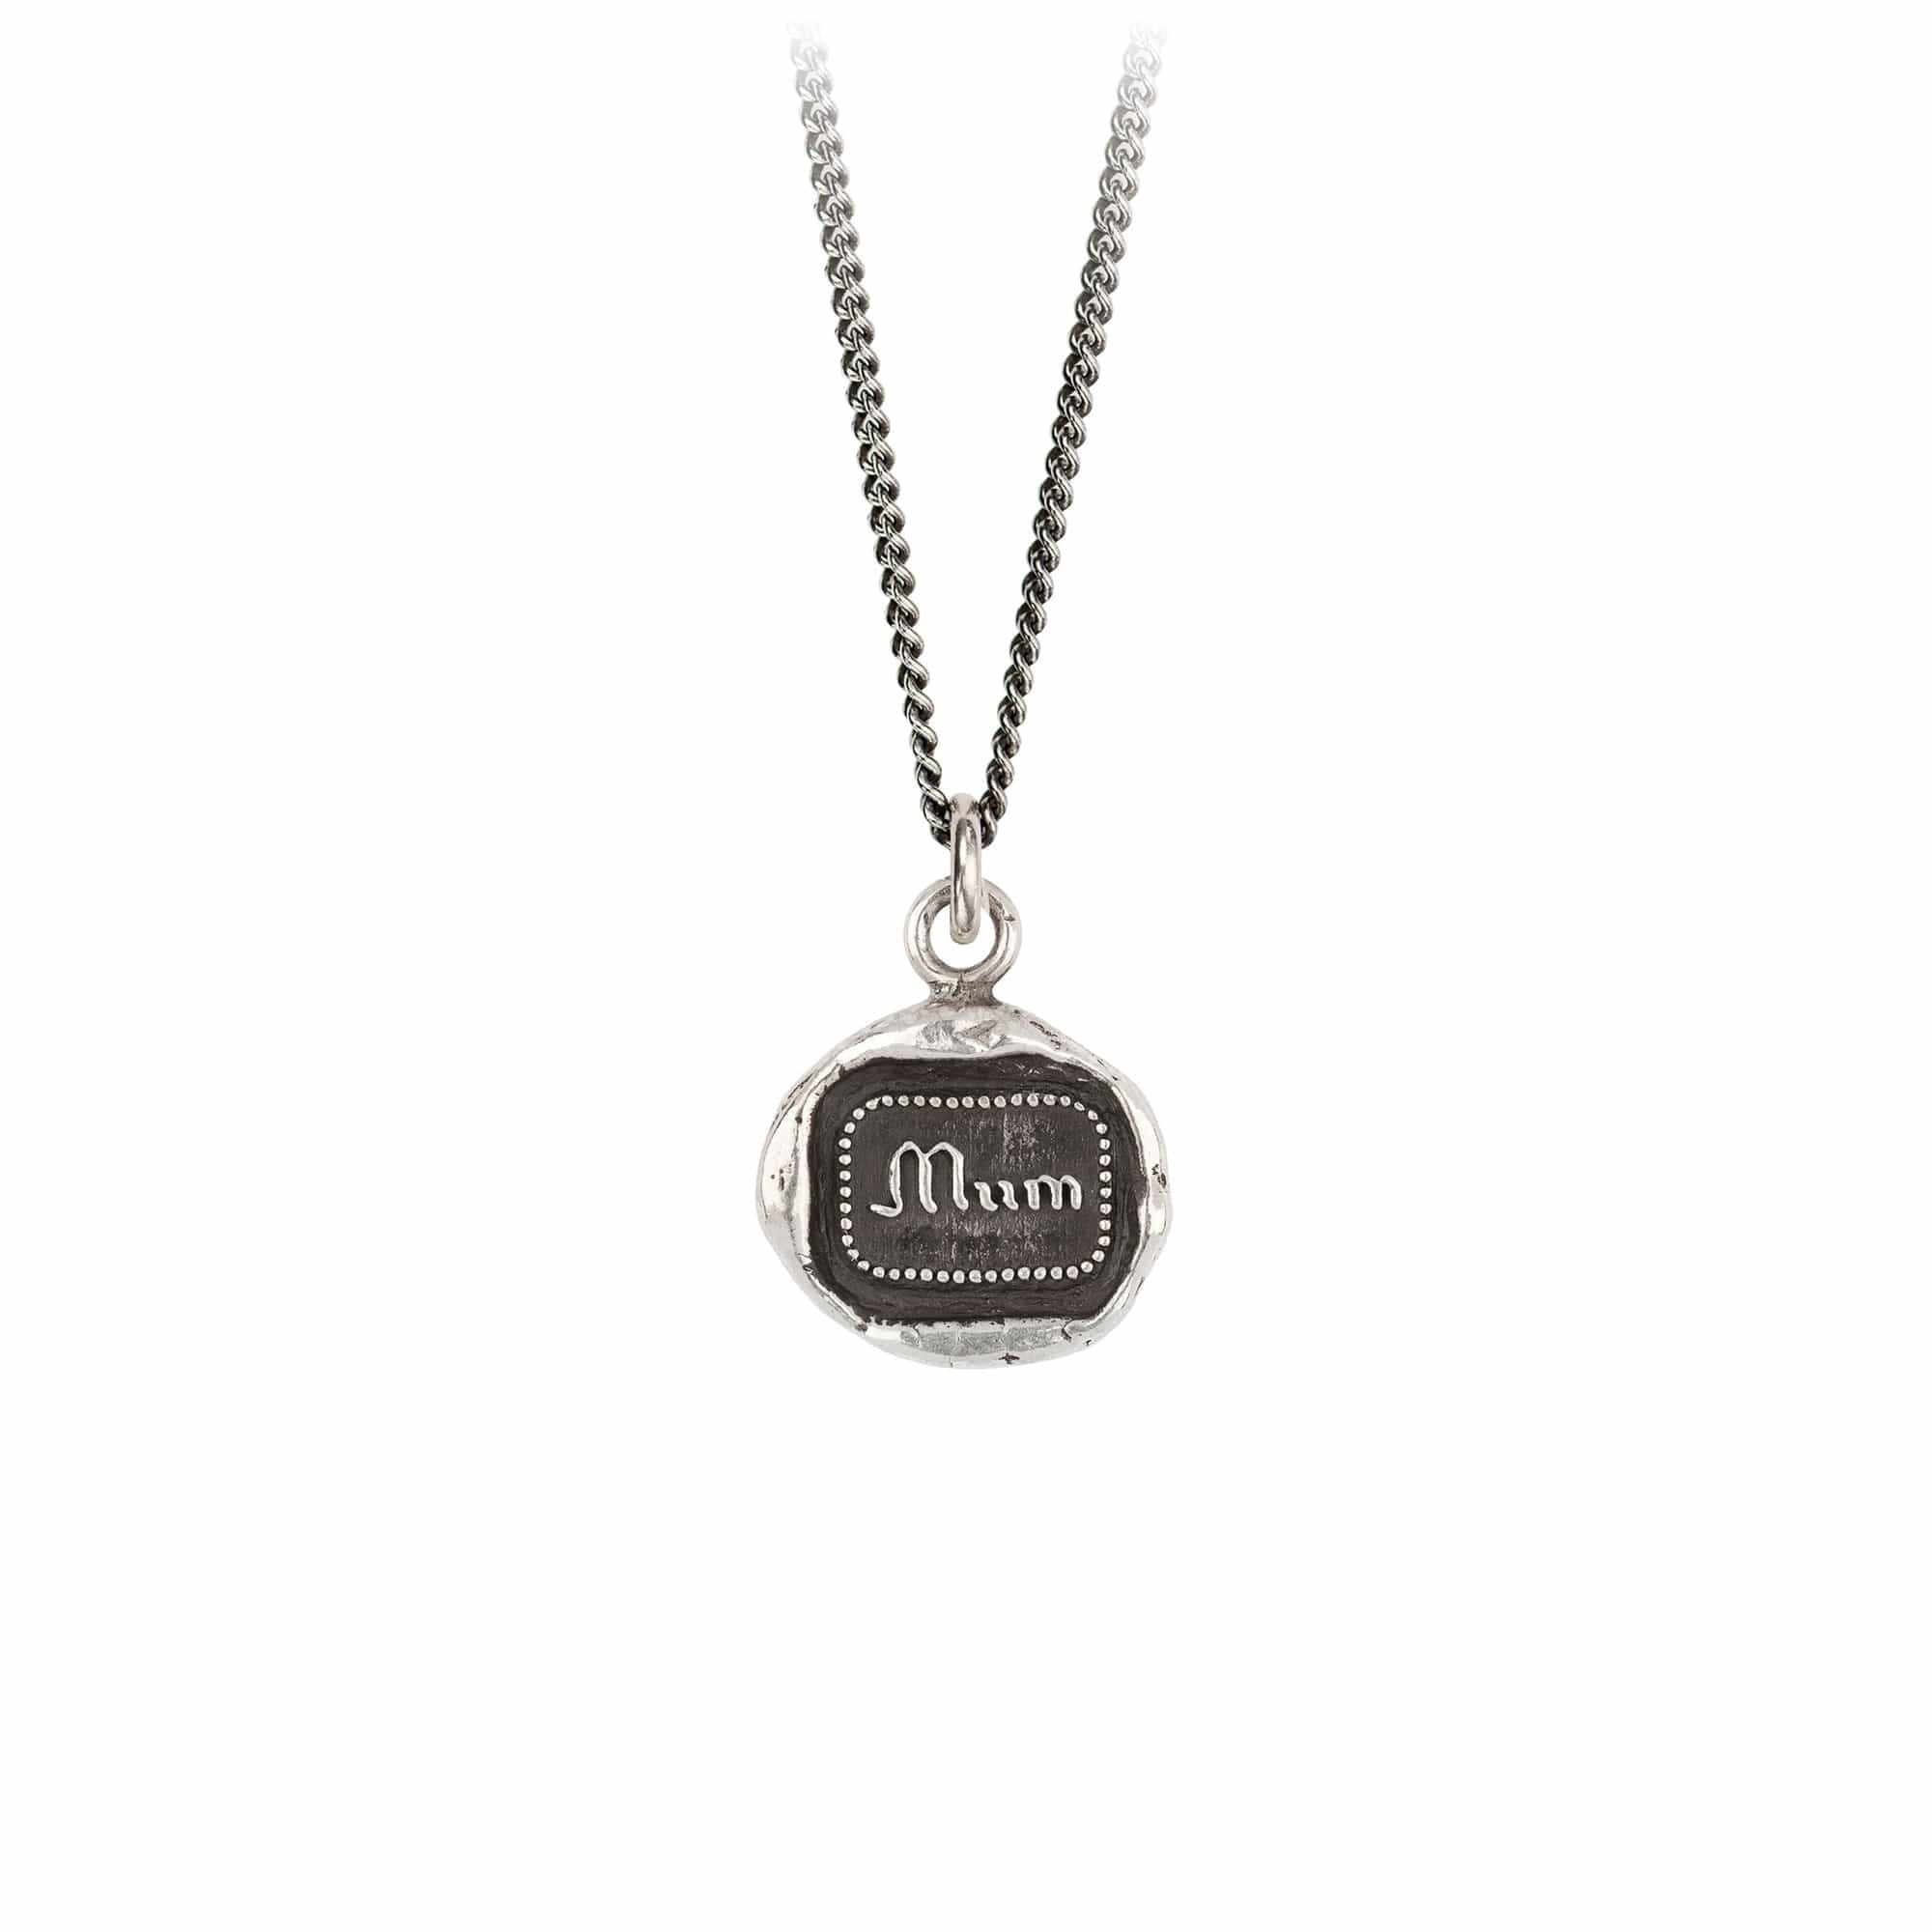 Reclaimed Vintage Inspired 'Mum' heart necklace in silver | ASOS